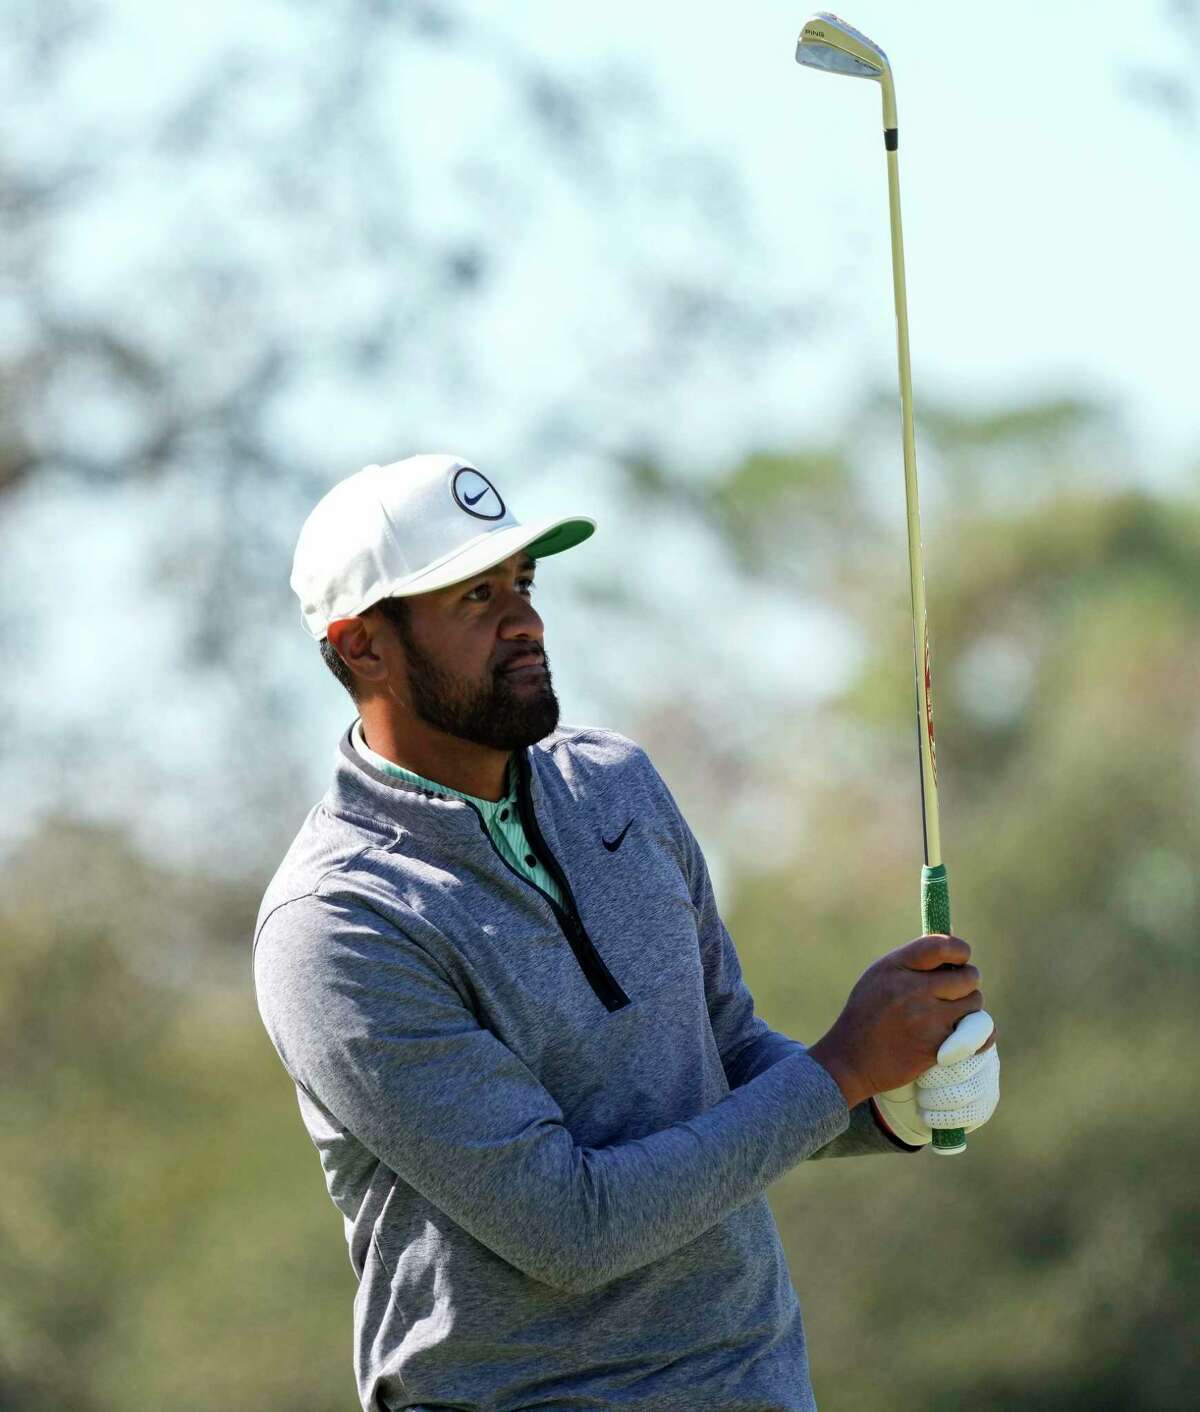 Tony Finau watches his third shot on the eighth hole during the final round of the Houston Open golf tournament, Sunday, Nov. 13, 2022, in Houston.